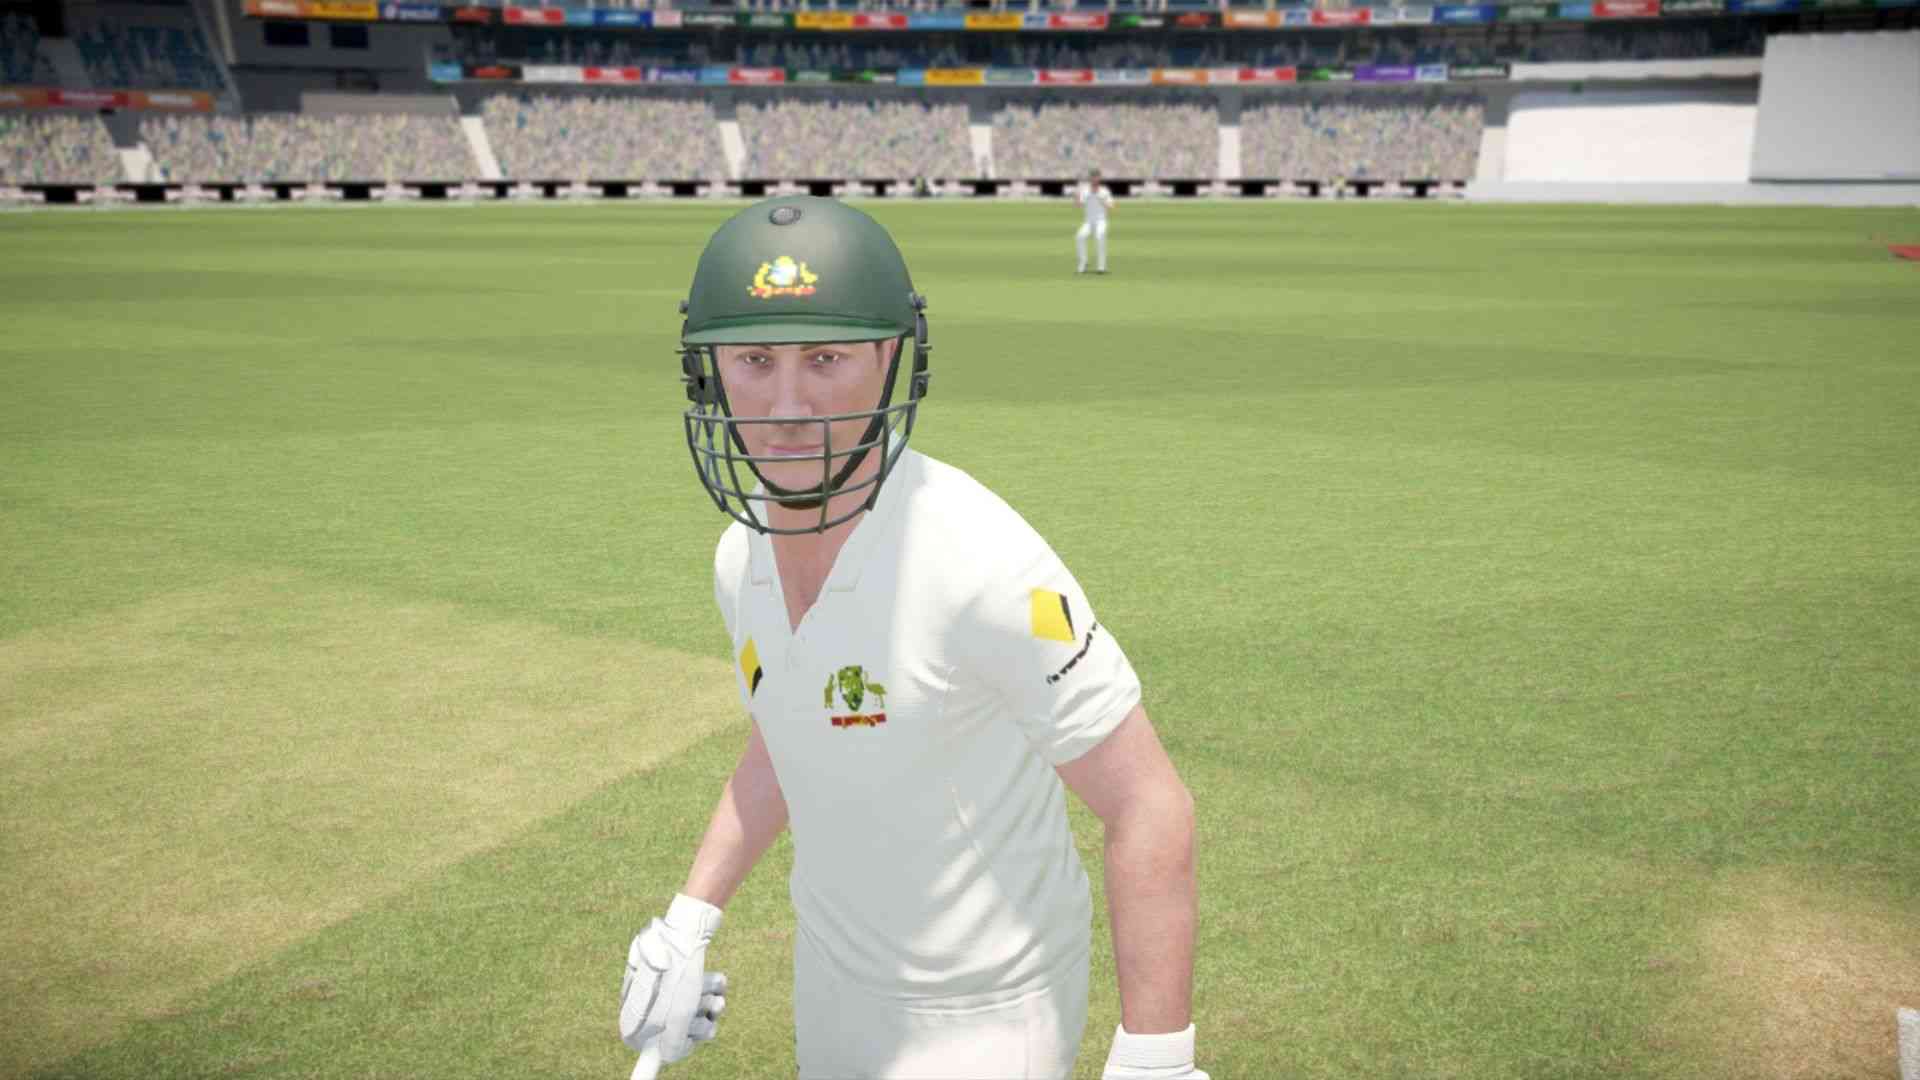 Ashed cricket 17 download pc highly compressed, how to download ashes cricket 2017 pc game,